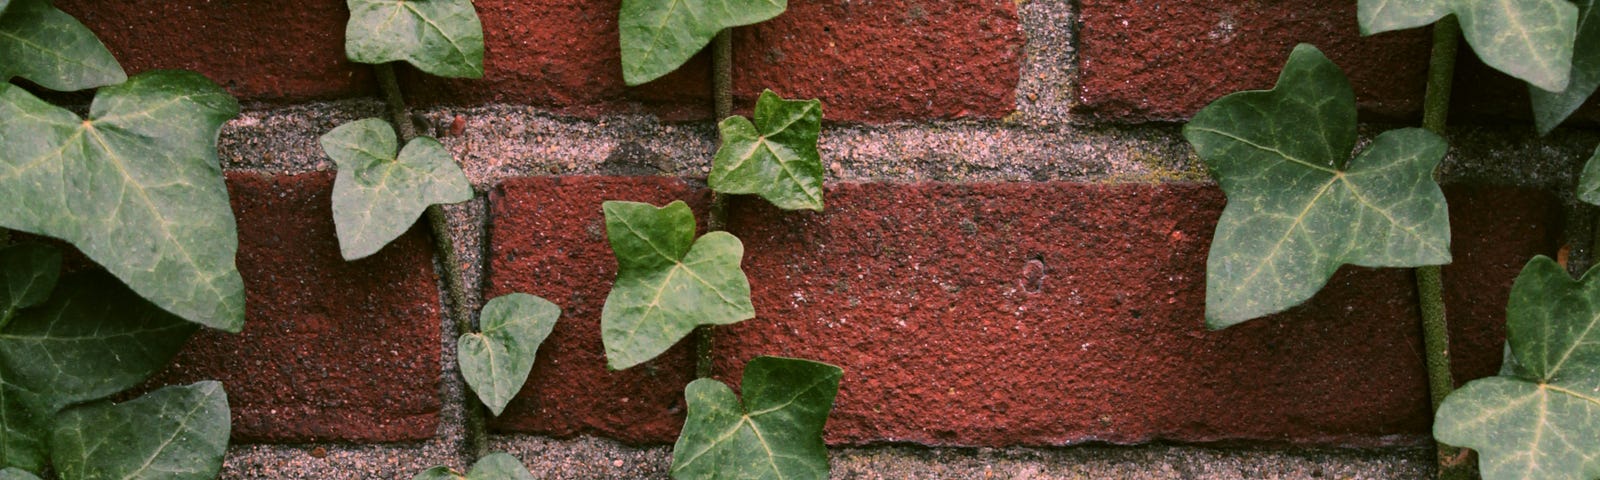 Photo of a brick wall partially covered with vines of ivy. The green leaves with white accents contrast beautifully with the red brick and grey grout.